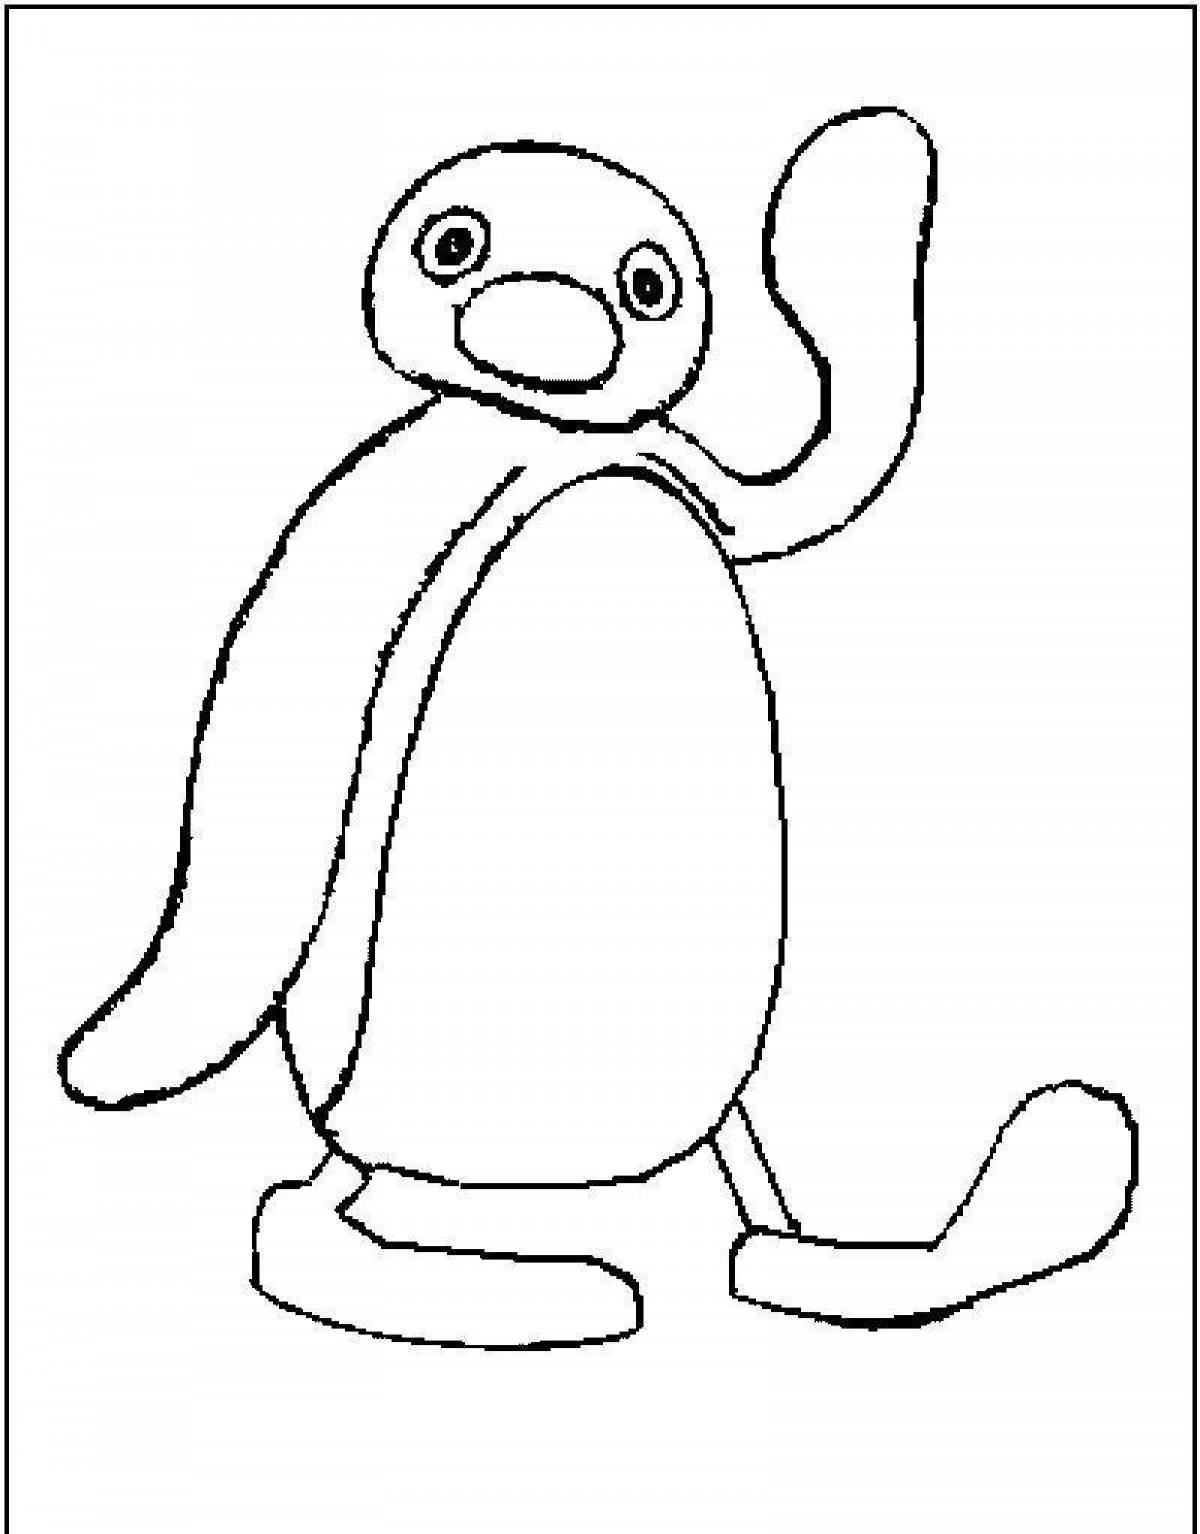 Outstanding penguin coloring book